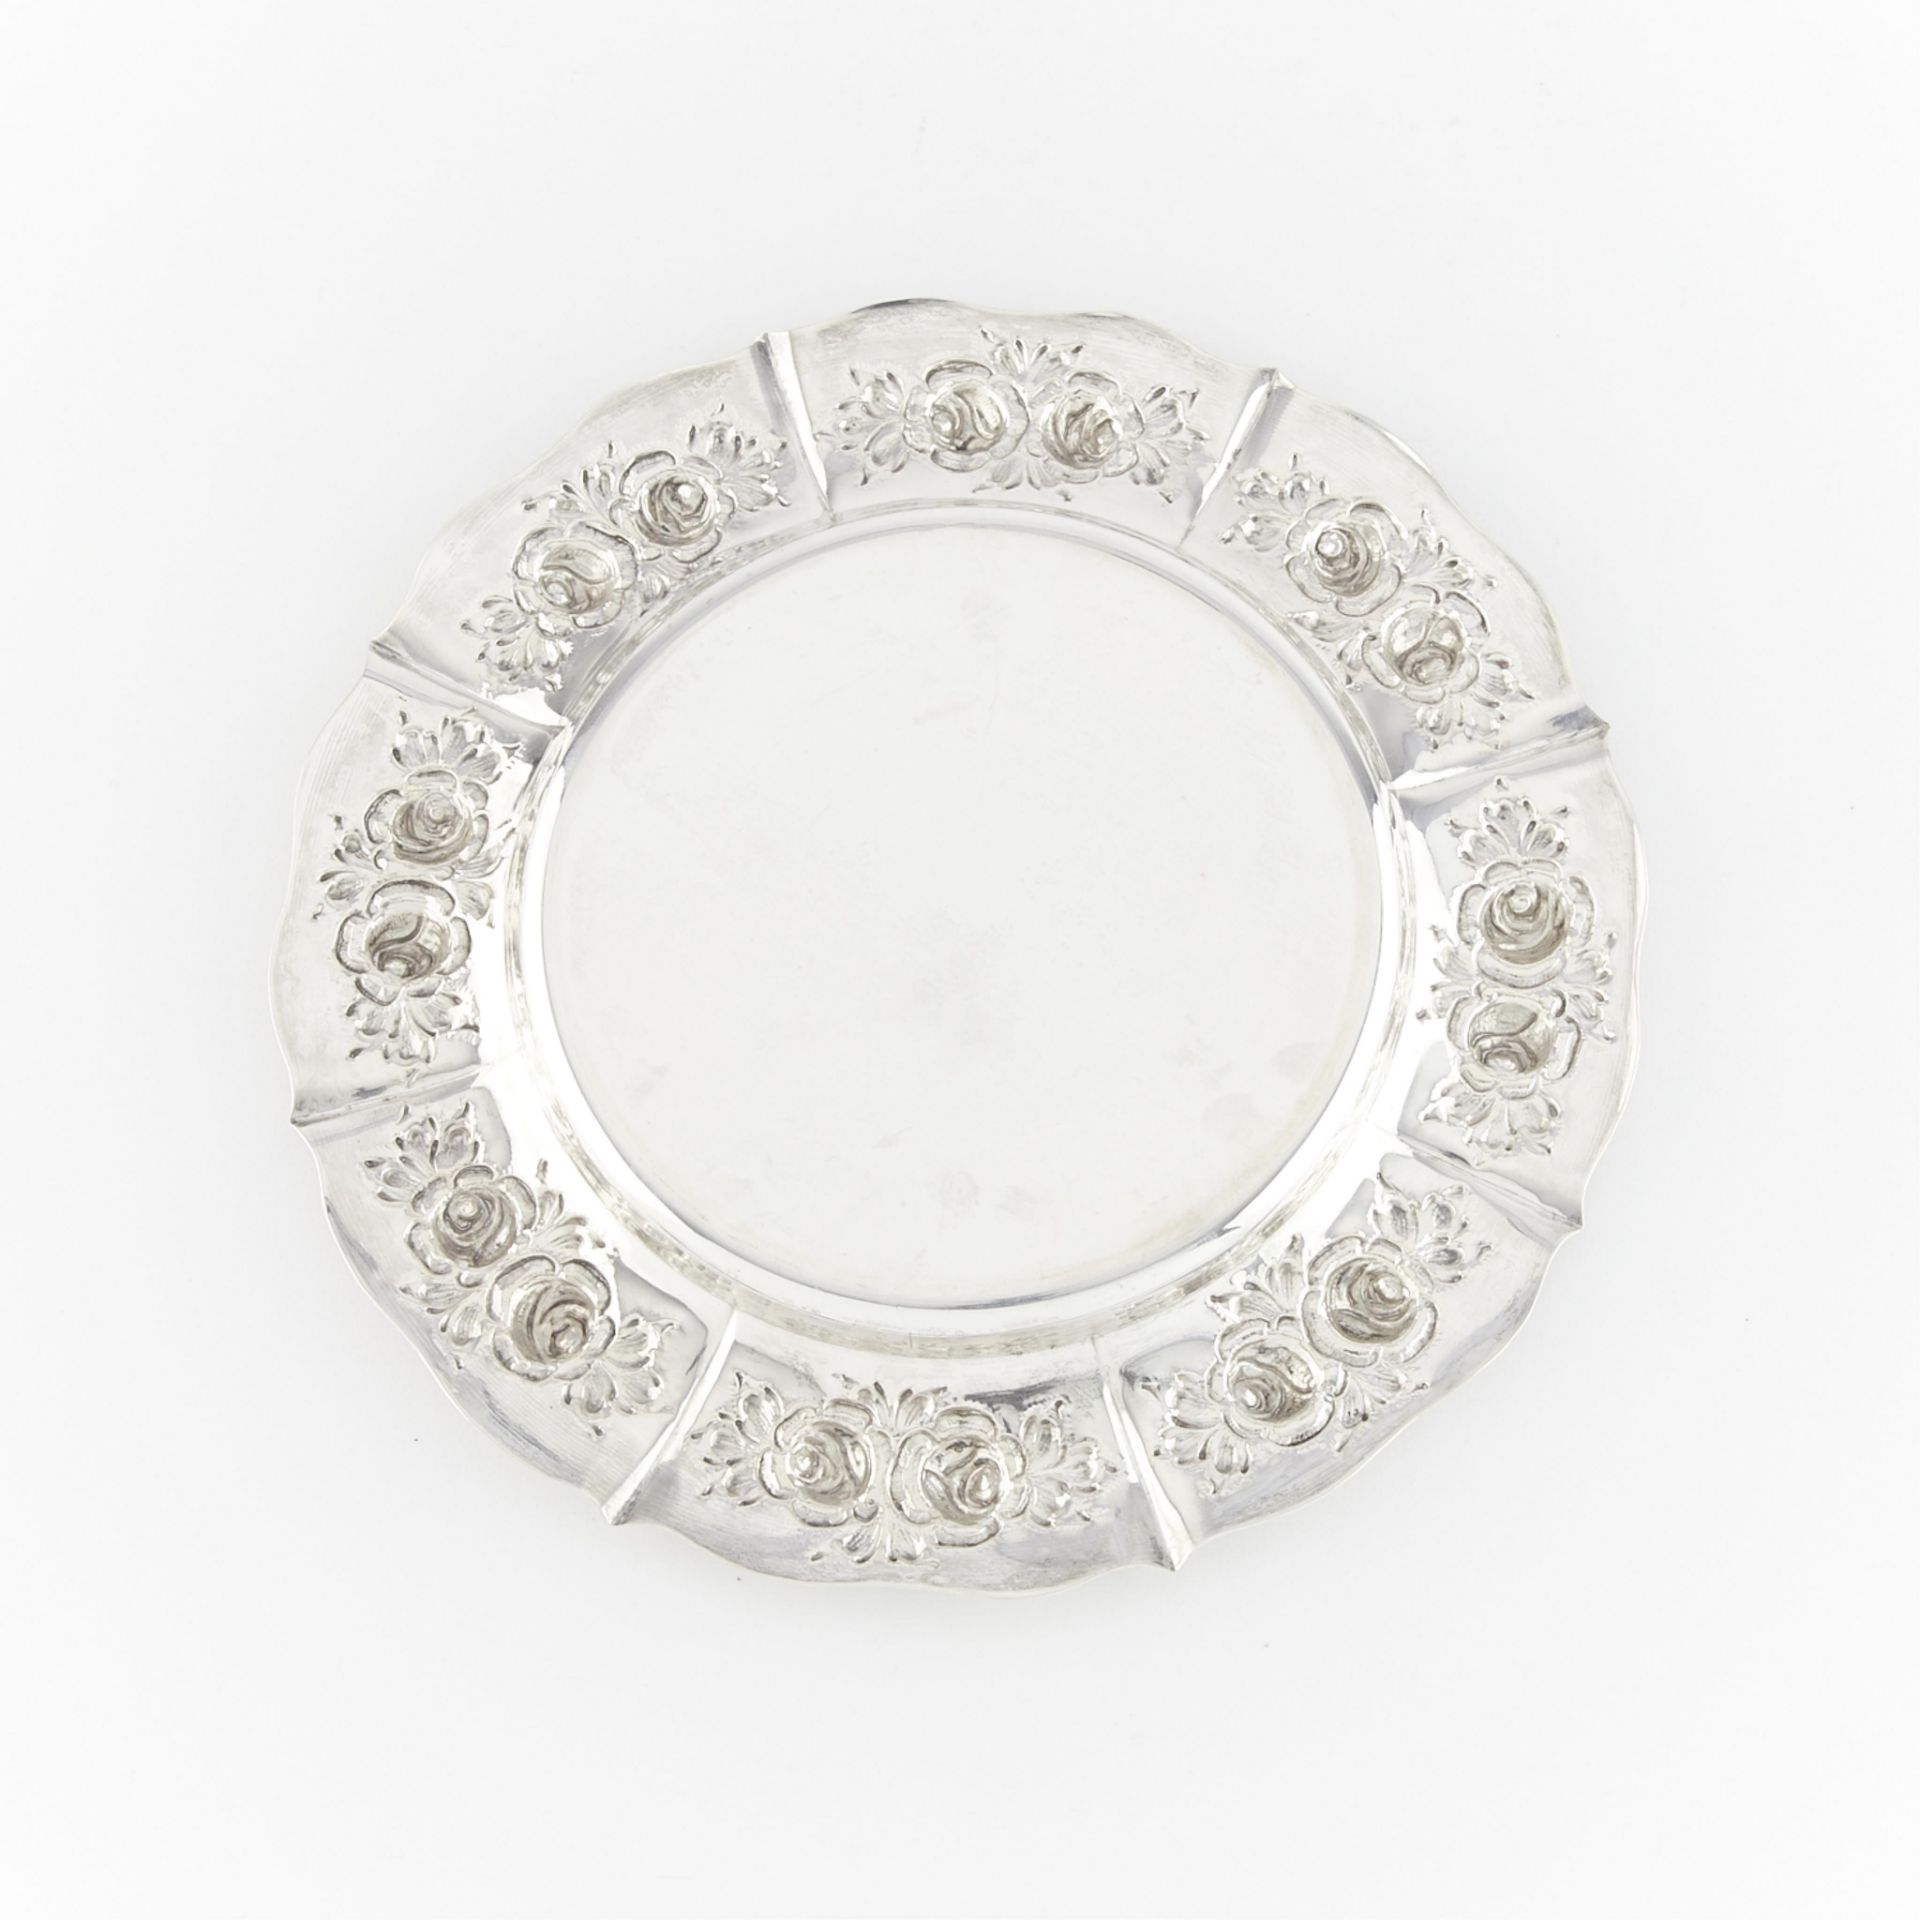 800 Silver Plate with Repousse Roses - Image 4 of 6